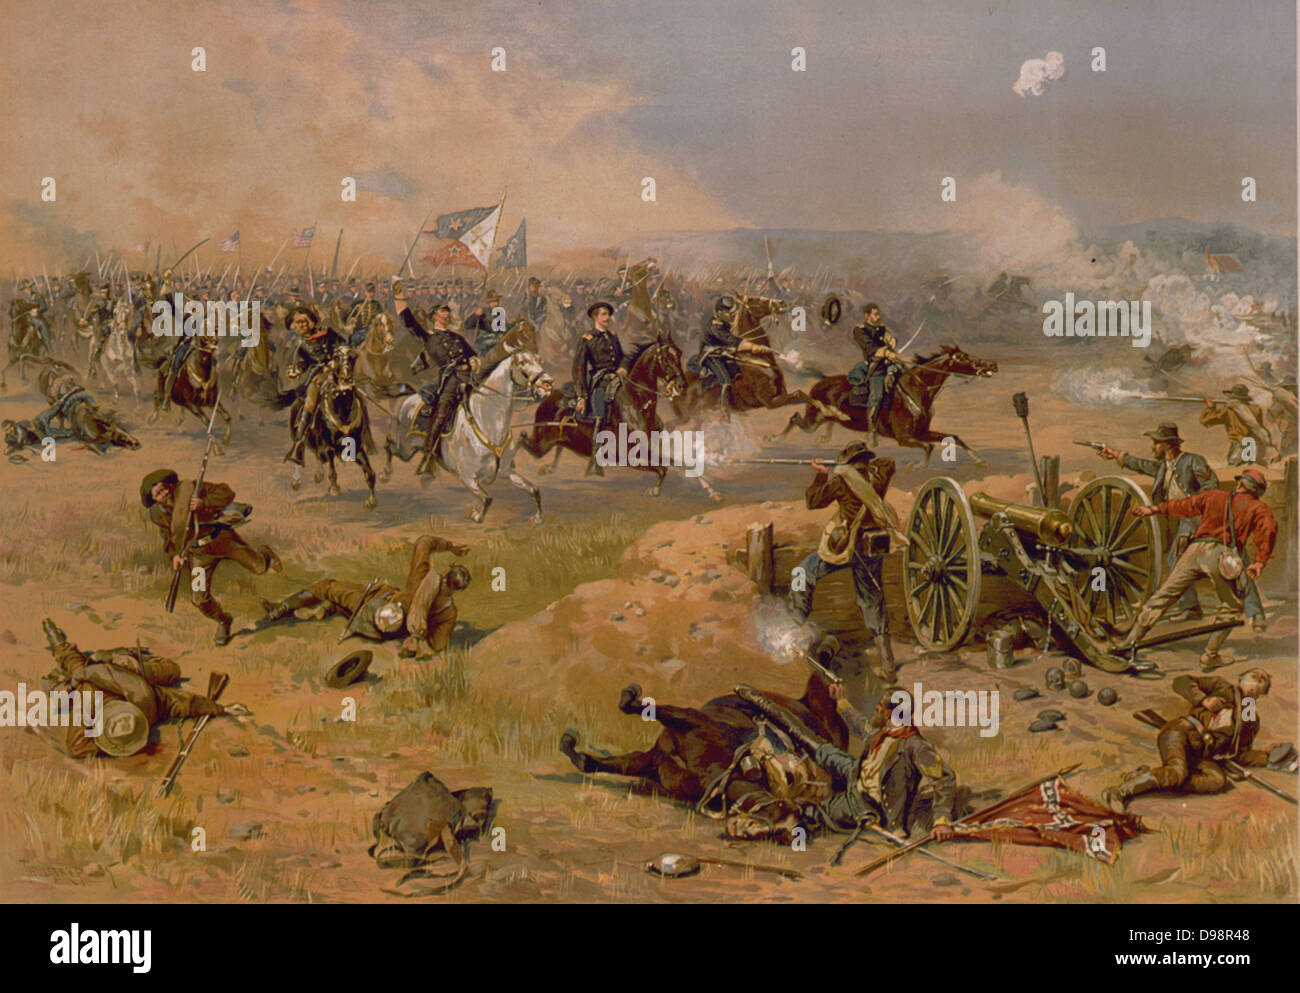 American Civil War 1861-1865: 'Sheridan's Final Charge at Winchester'. Battle of Opequon also called Third Battle of Winchester, 19 September 1864. Union forces under Sheridan defeated Confederates under Early. Print c1886. Stock Photo